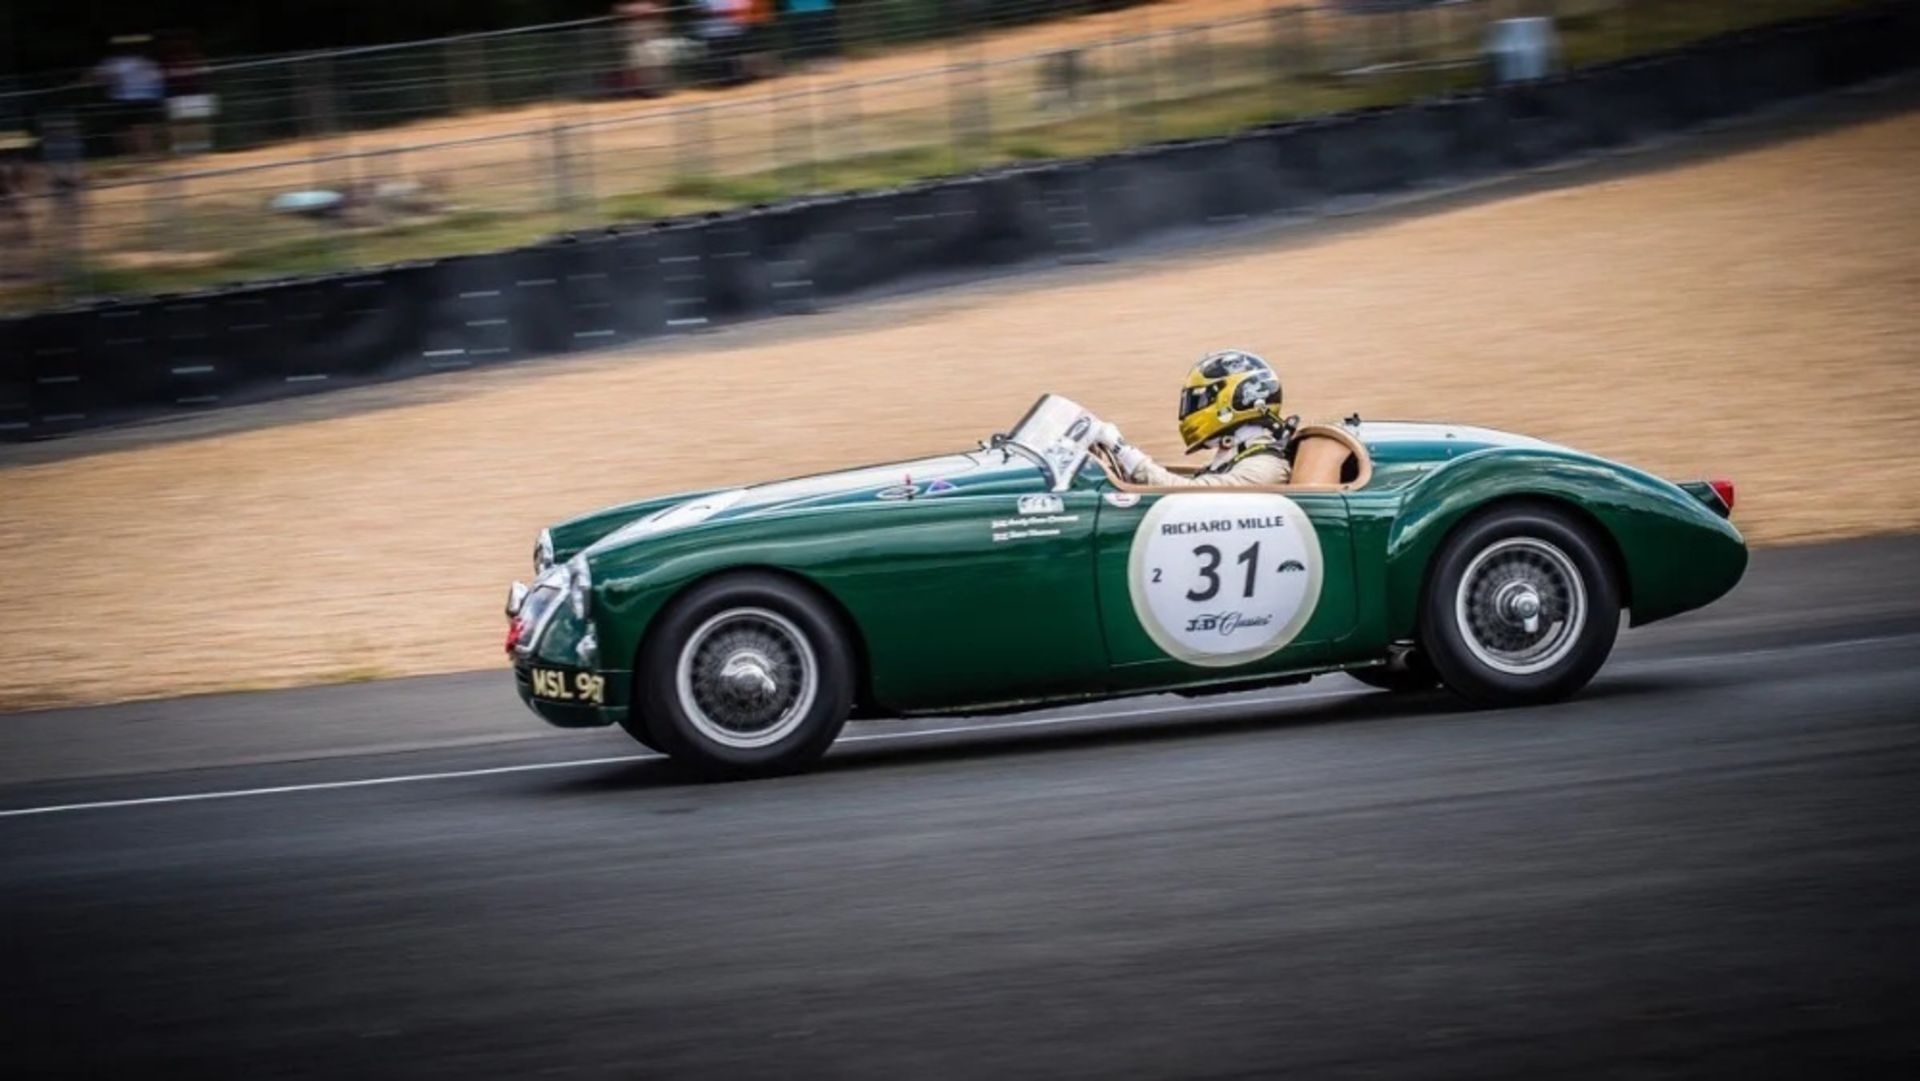 1958 MGA ROADSTER - CLASS WINNER OF LE MANS CLASSIC Registration Number: MSL 967 Chassis Number: - Image 3 of 9